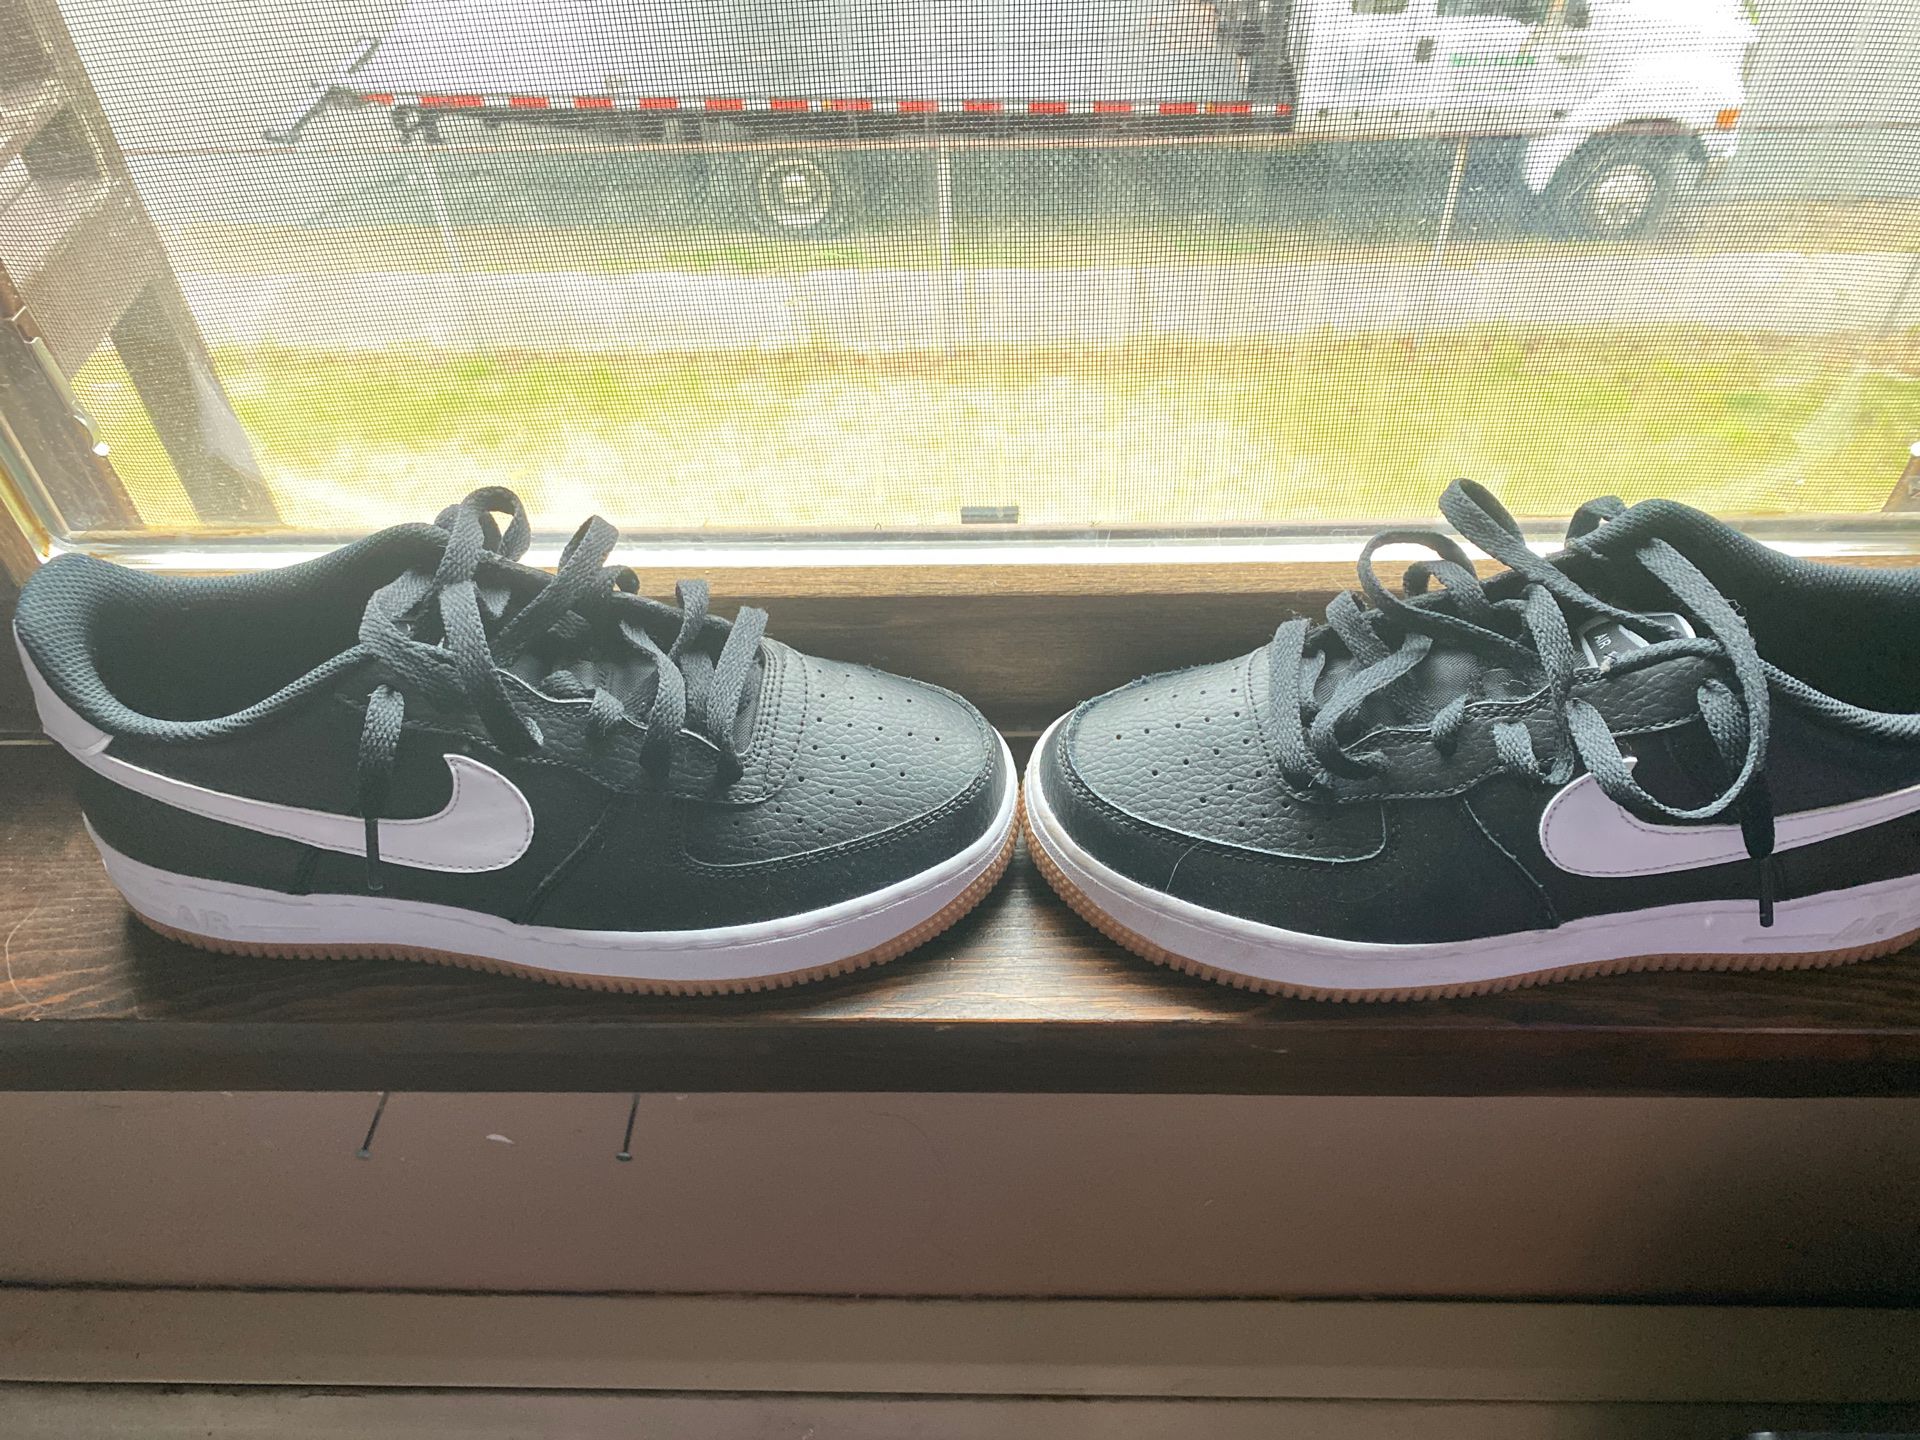 Nike Air Force one size 7